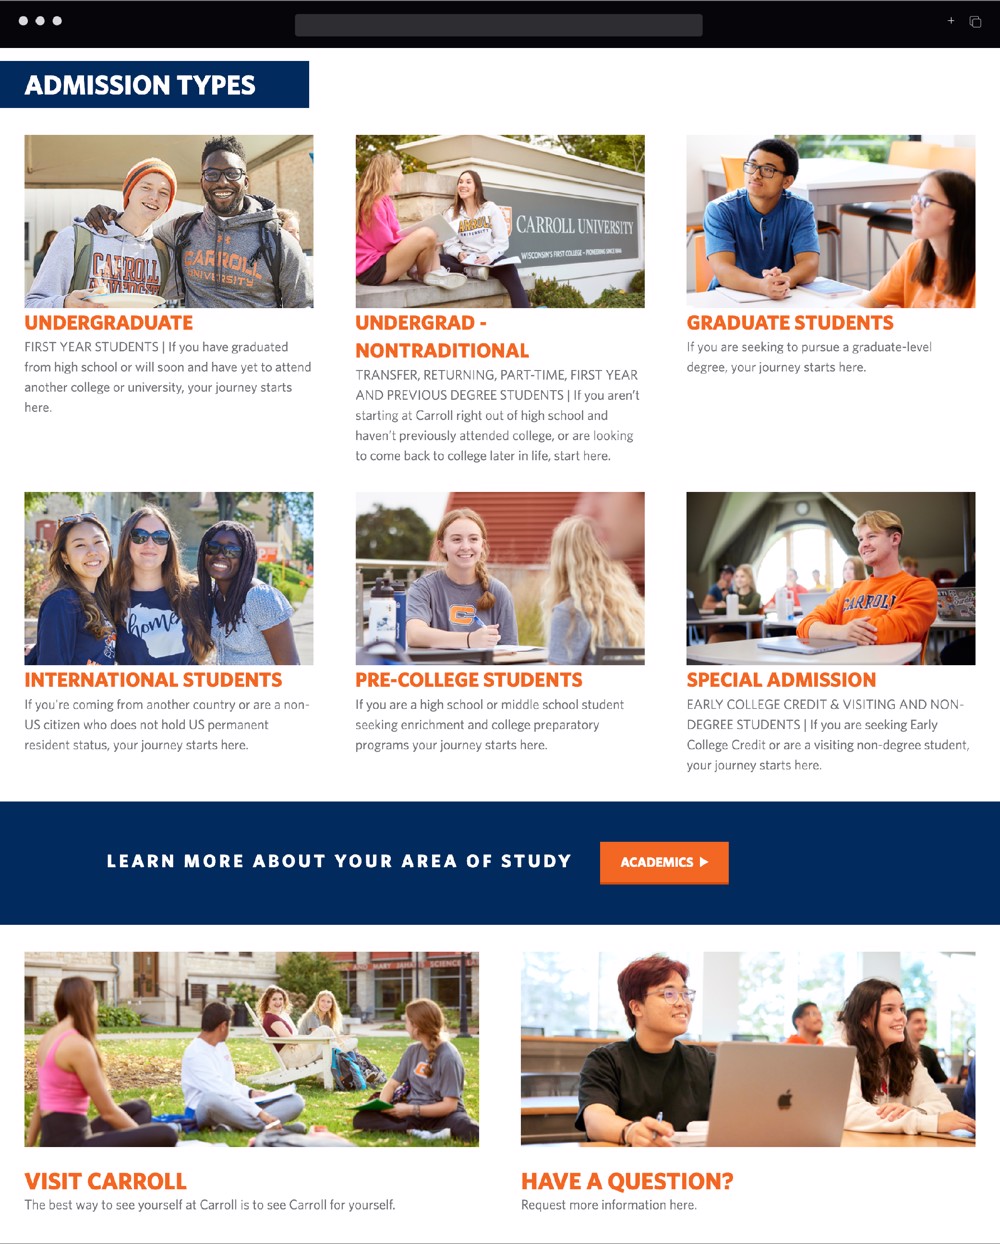 Carroll University admissions page 